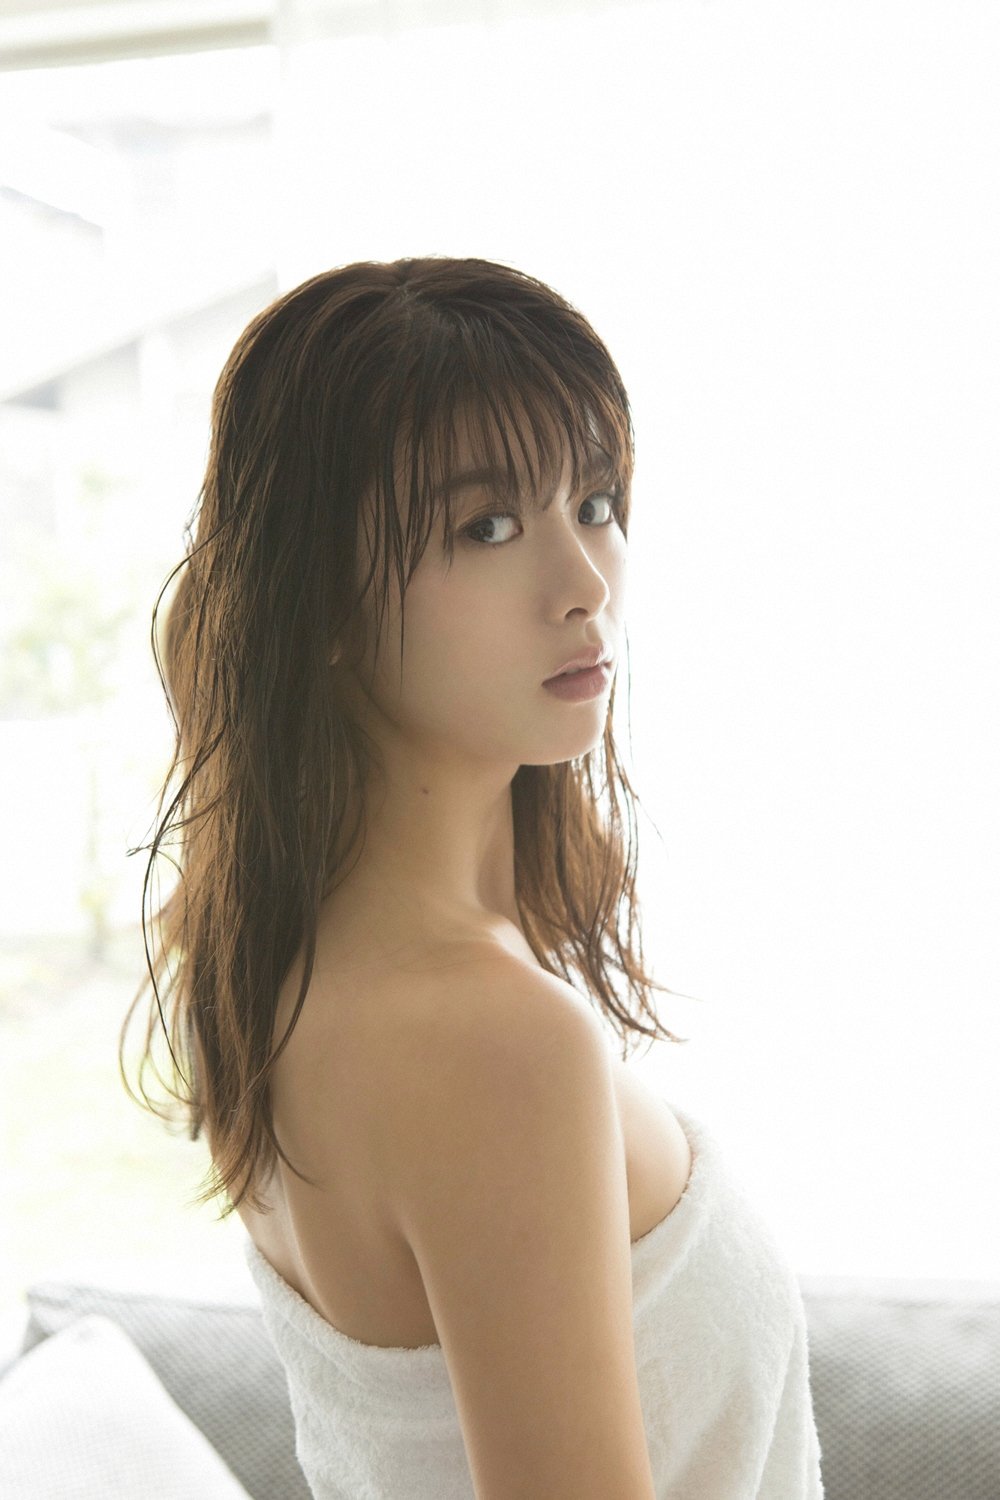 Japanese Actress And Model - Fumika Baba - YS Web Vol.729 - TruePic.net - Picture-32